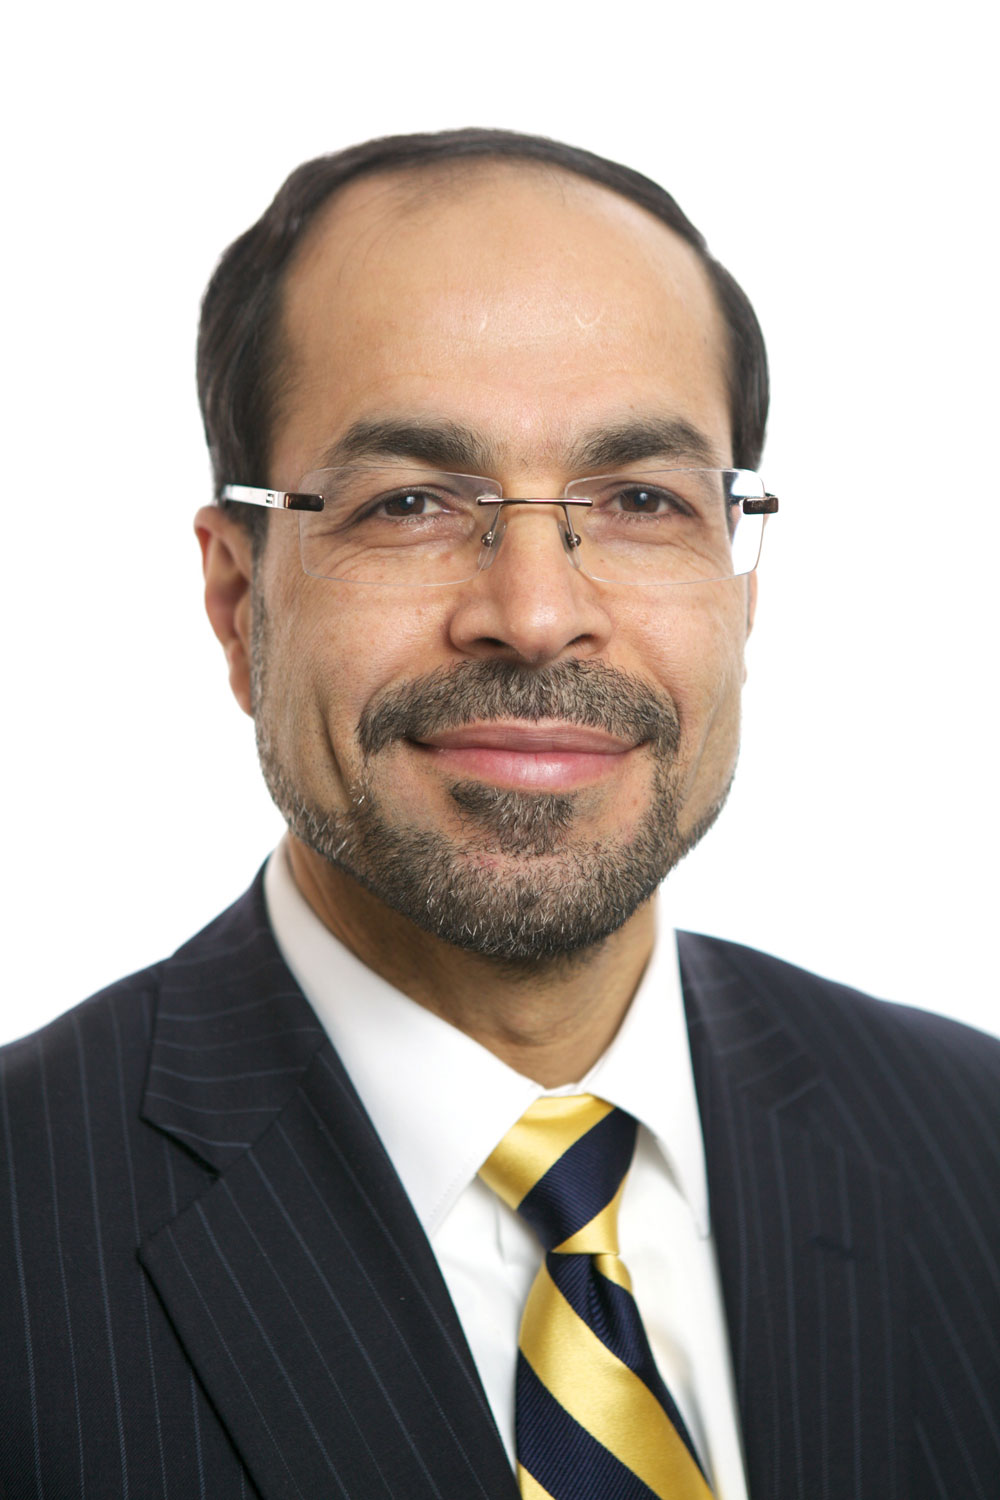 Nihad Awad, a target of NSA surveillance (Courtesy Council on American-Islamic Relations)